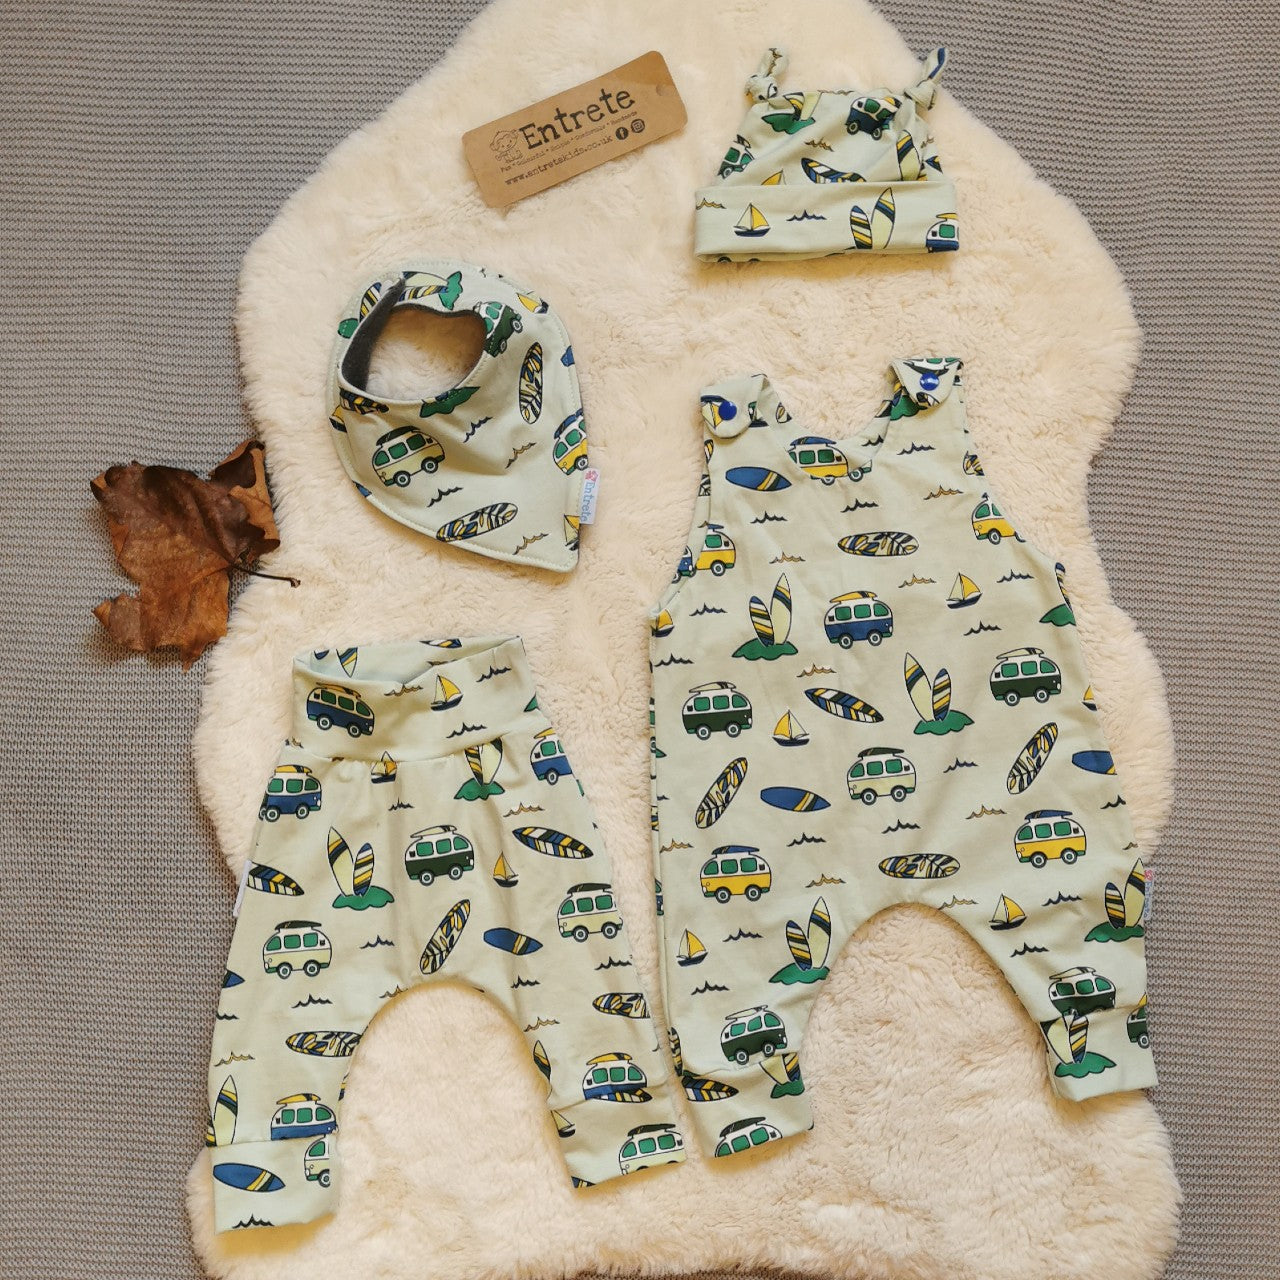 A large baby gift set shown in mint surf campervans for demonstration purposes, your gift set will be handmade using navy crocodiles cotton jersey.